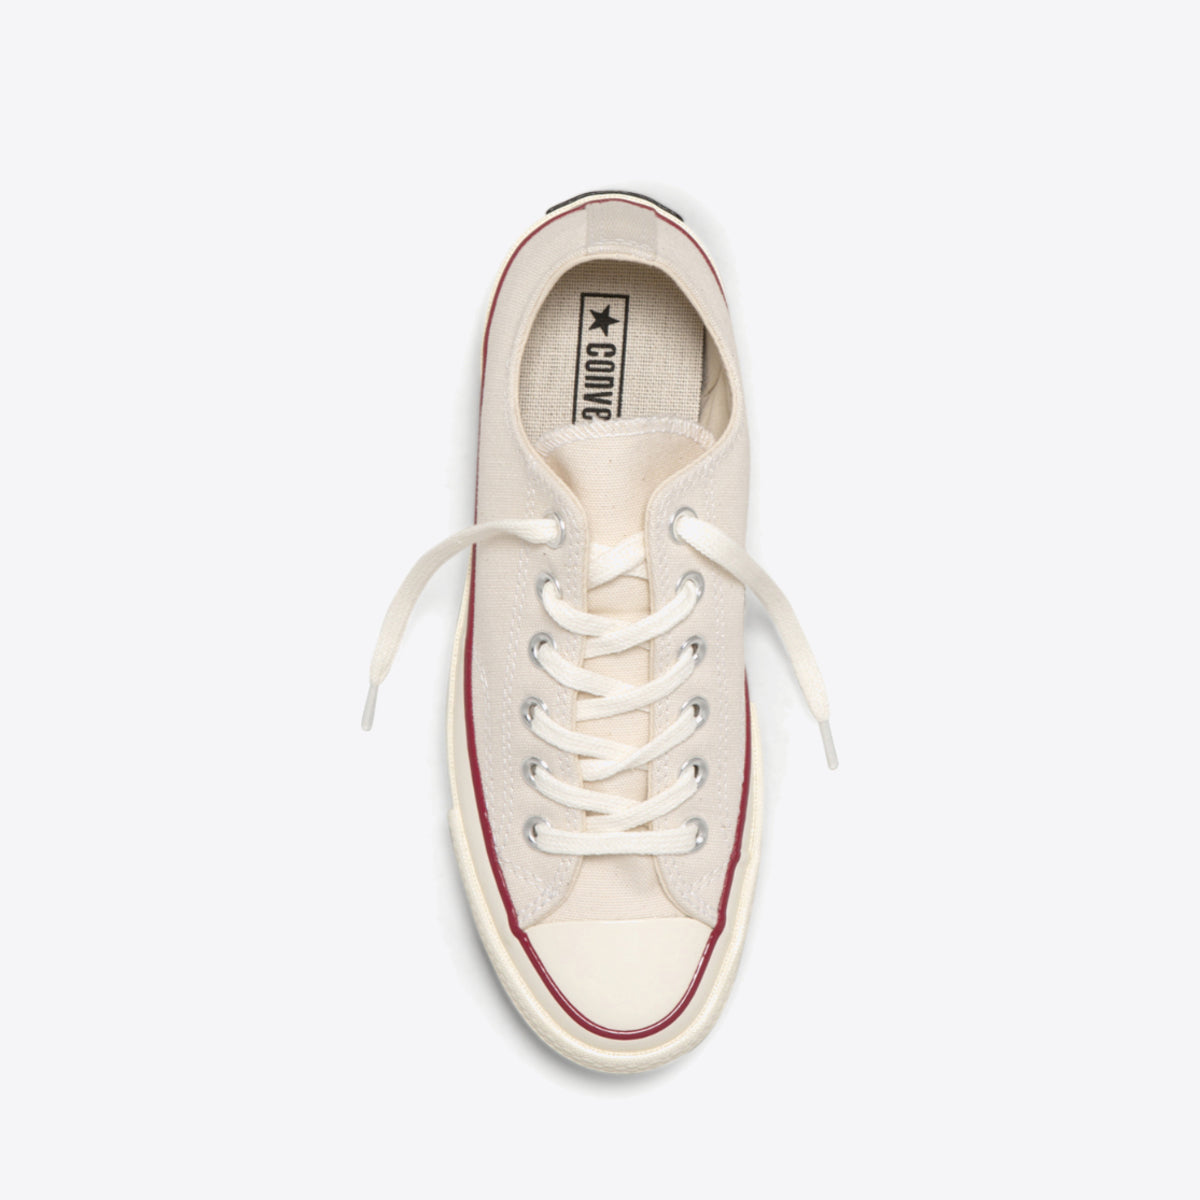 CONVERSE Chuck Taylor All Star 70 Canvas Low Parchment - Image 6